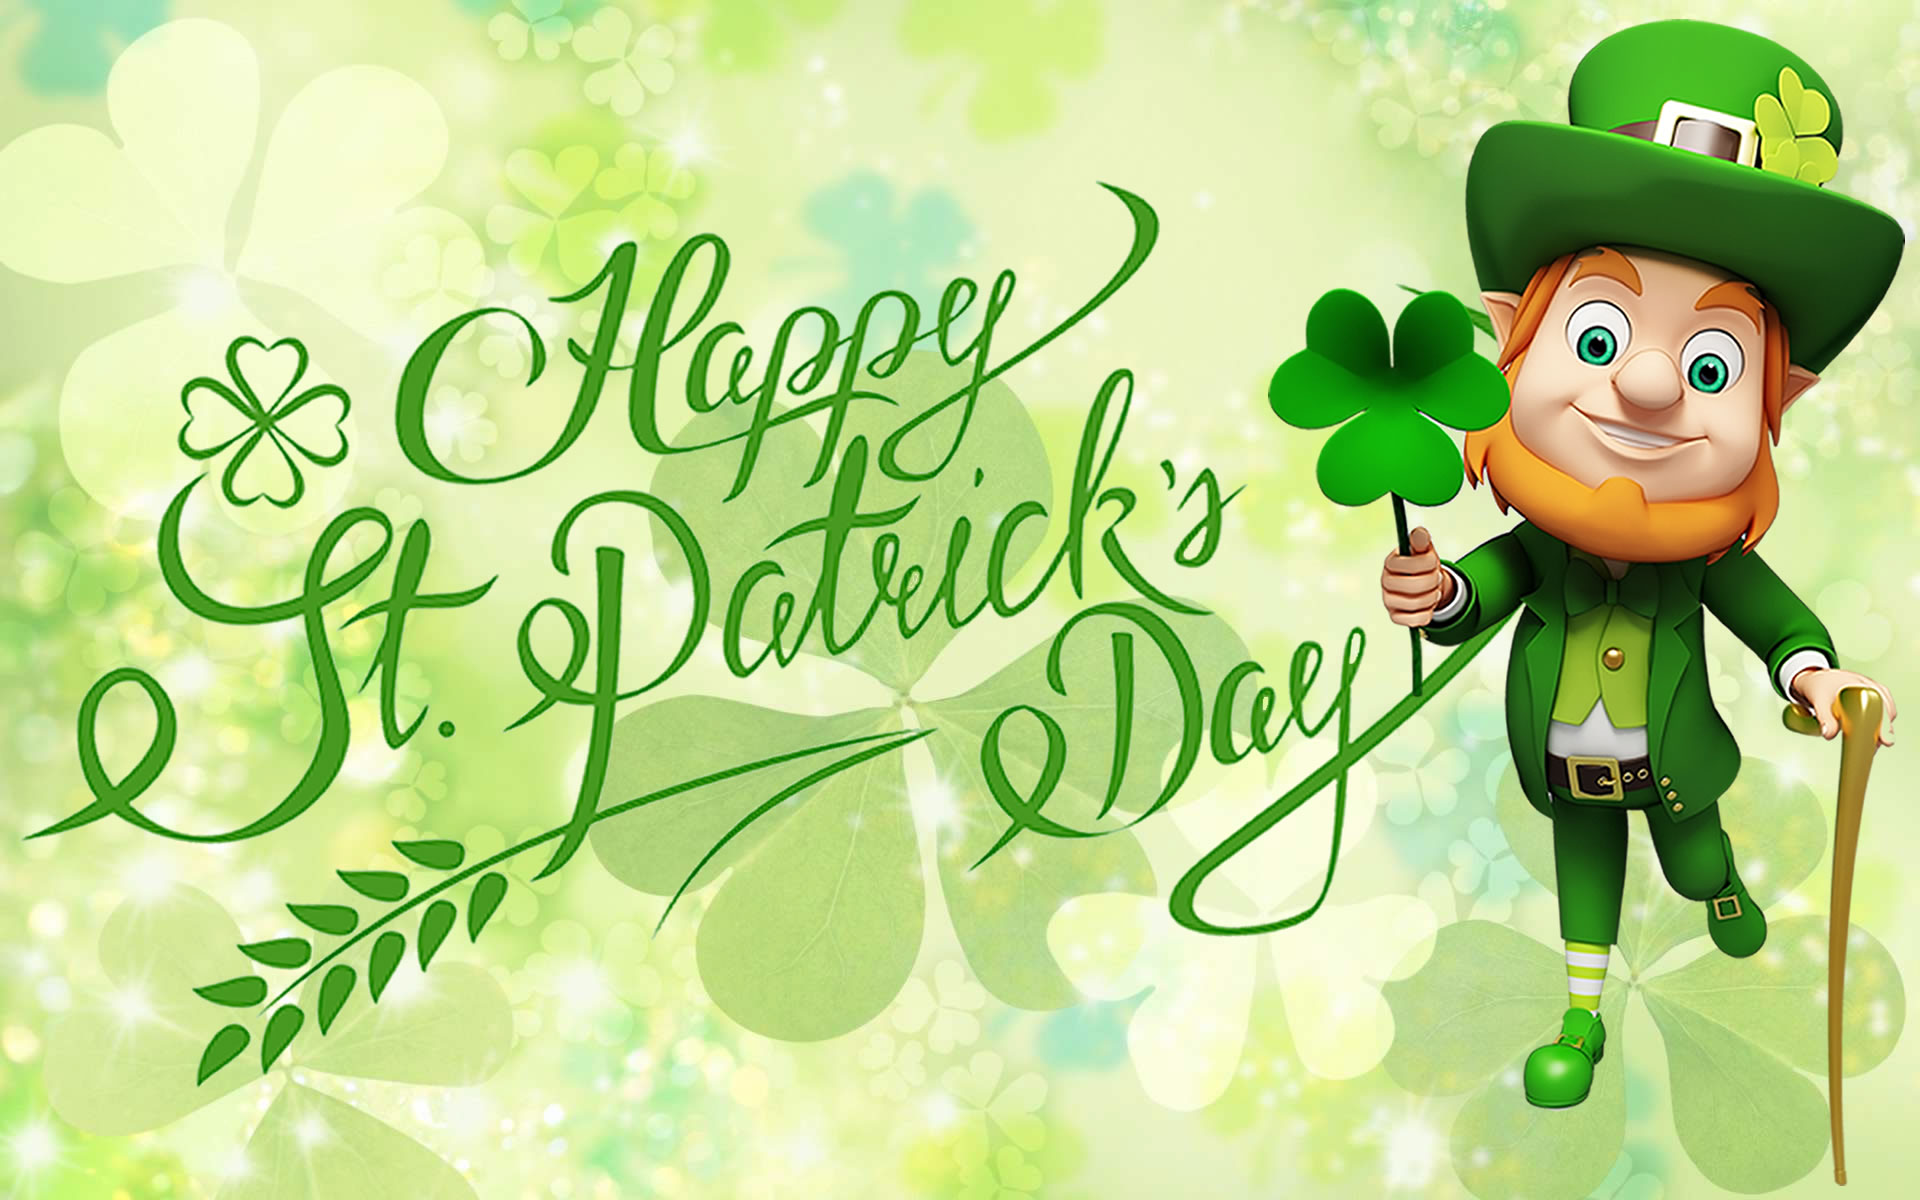 Browse our selection, customize your message & send happy st patricks d...